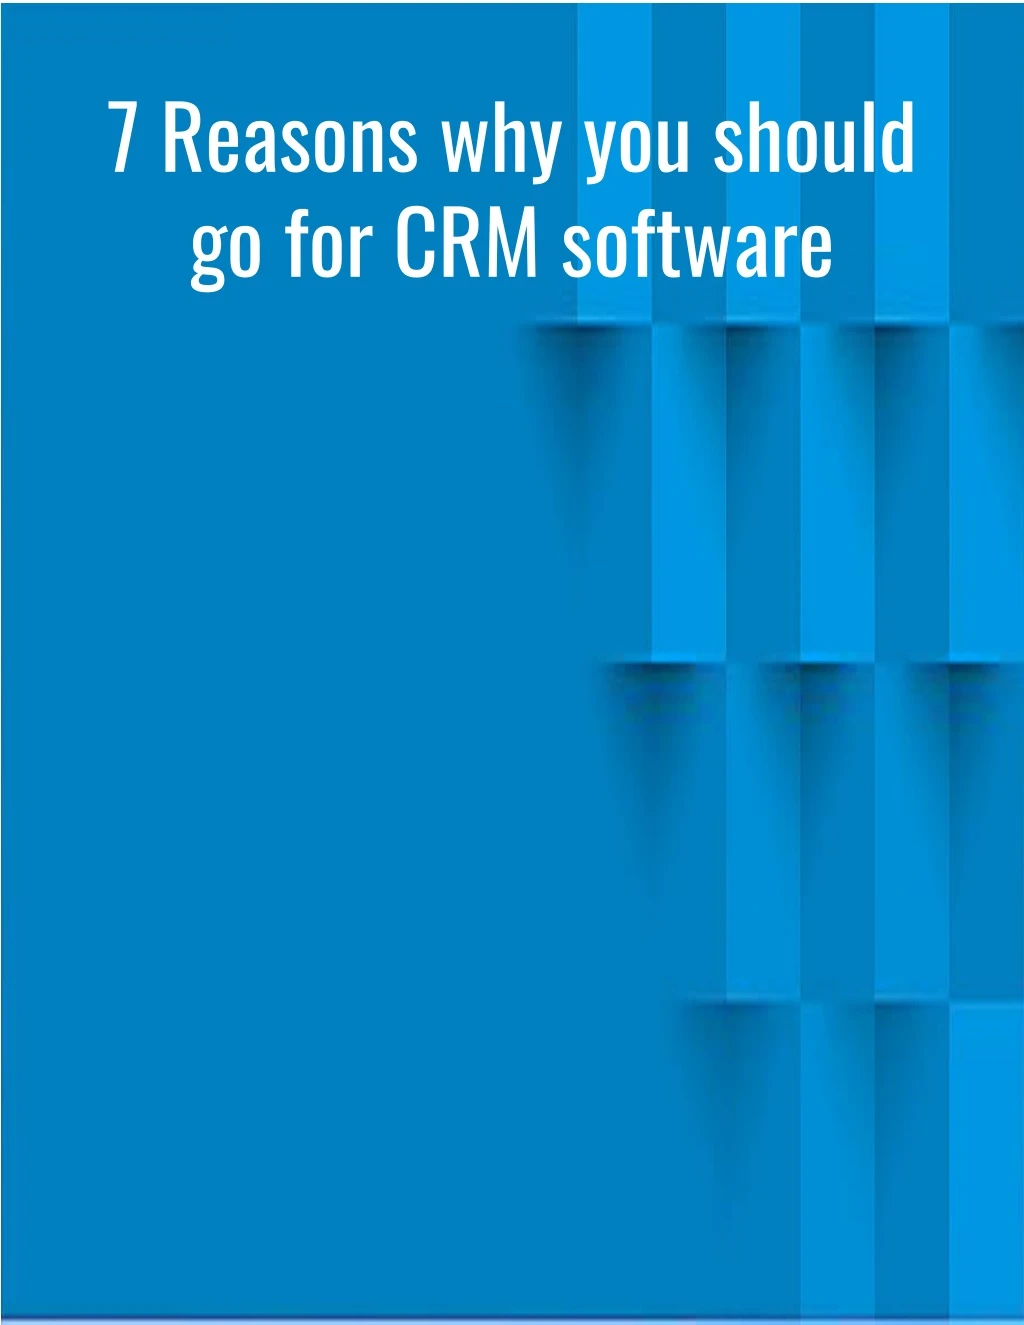 7 reasons why you should go for crm software